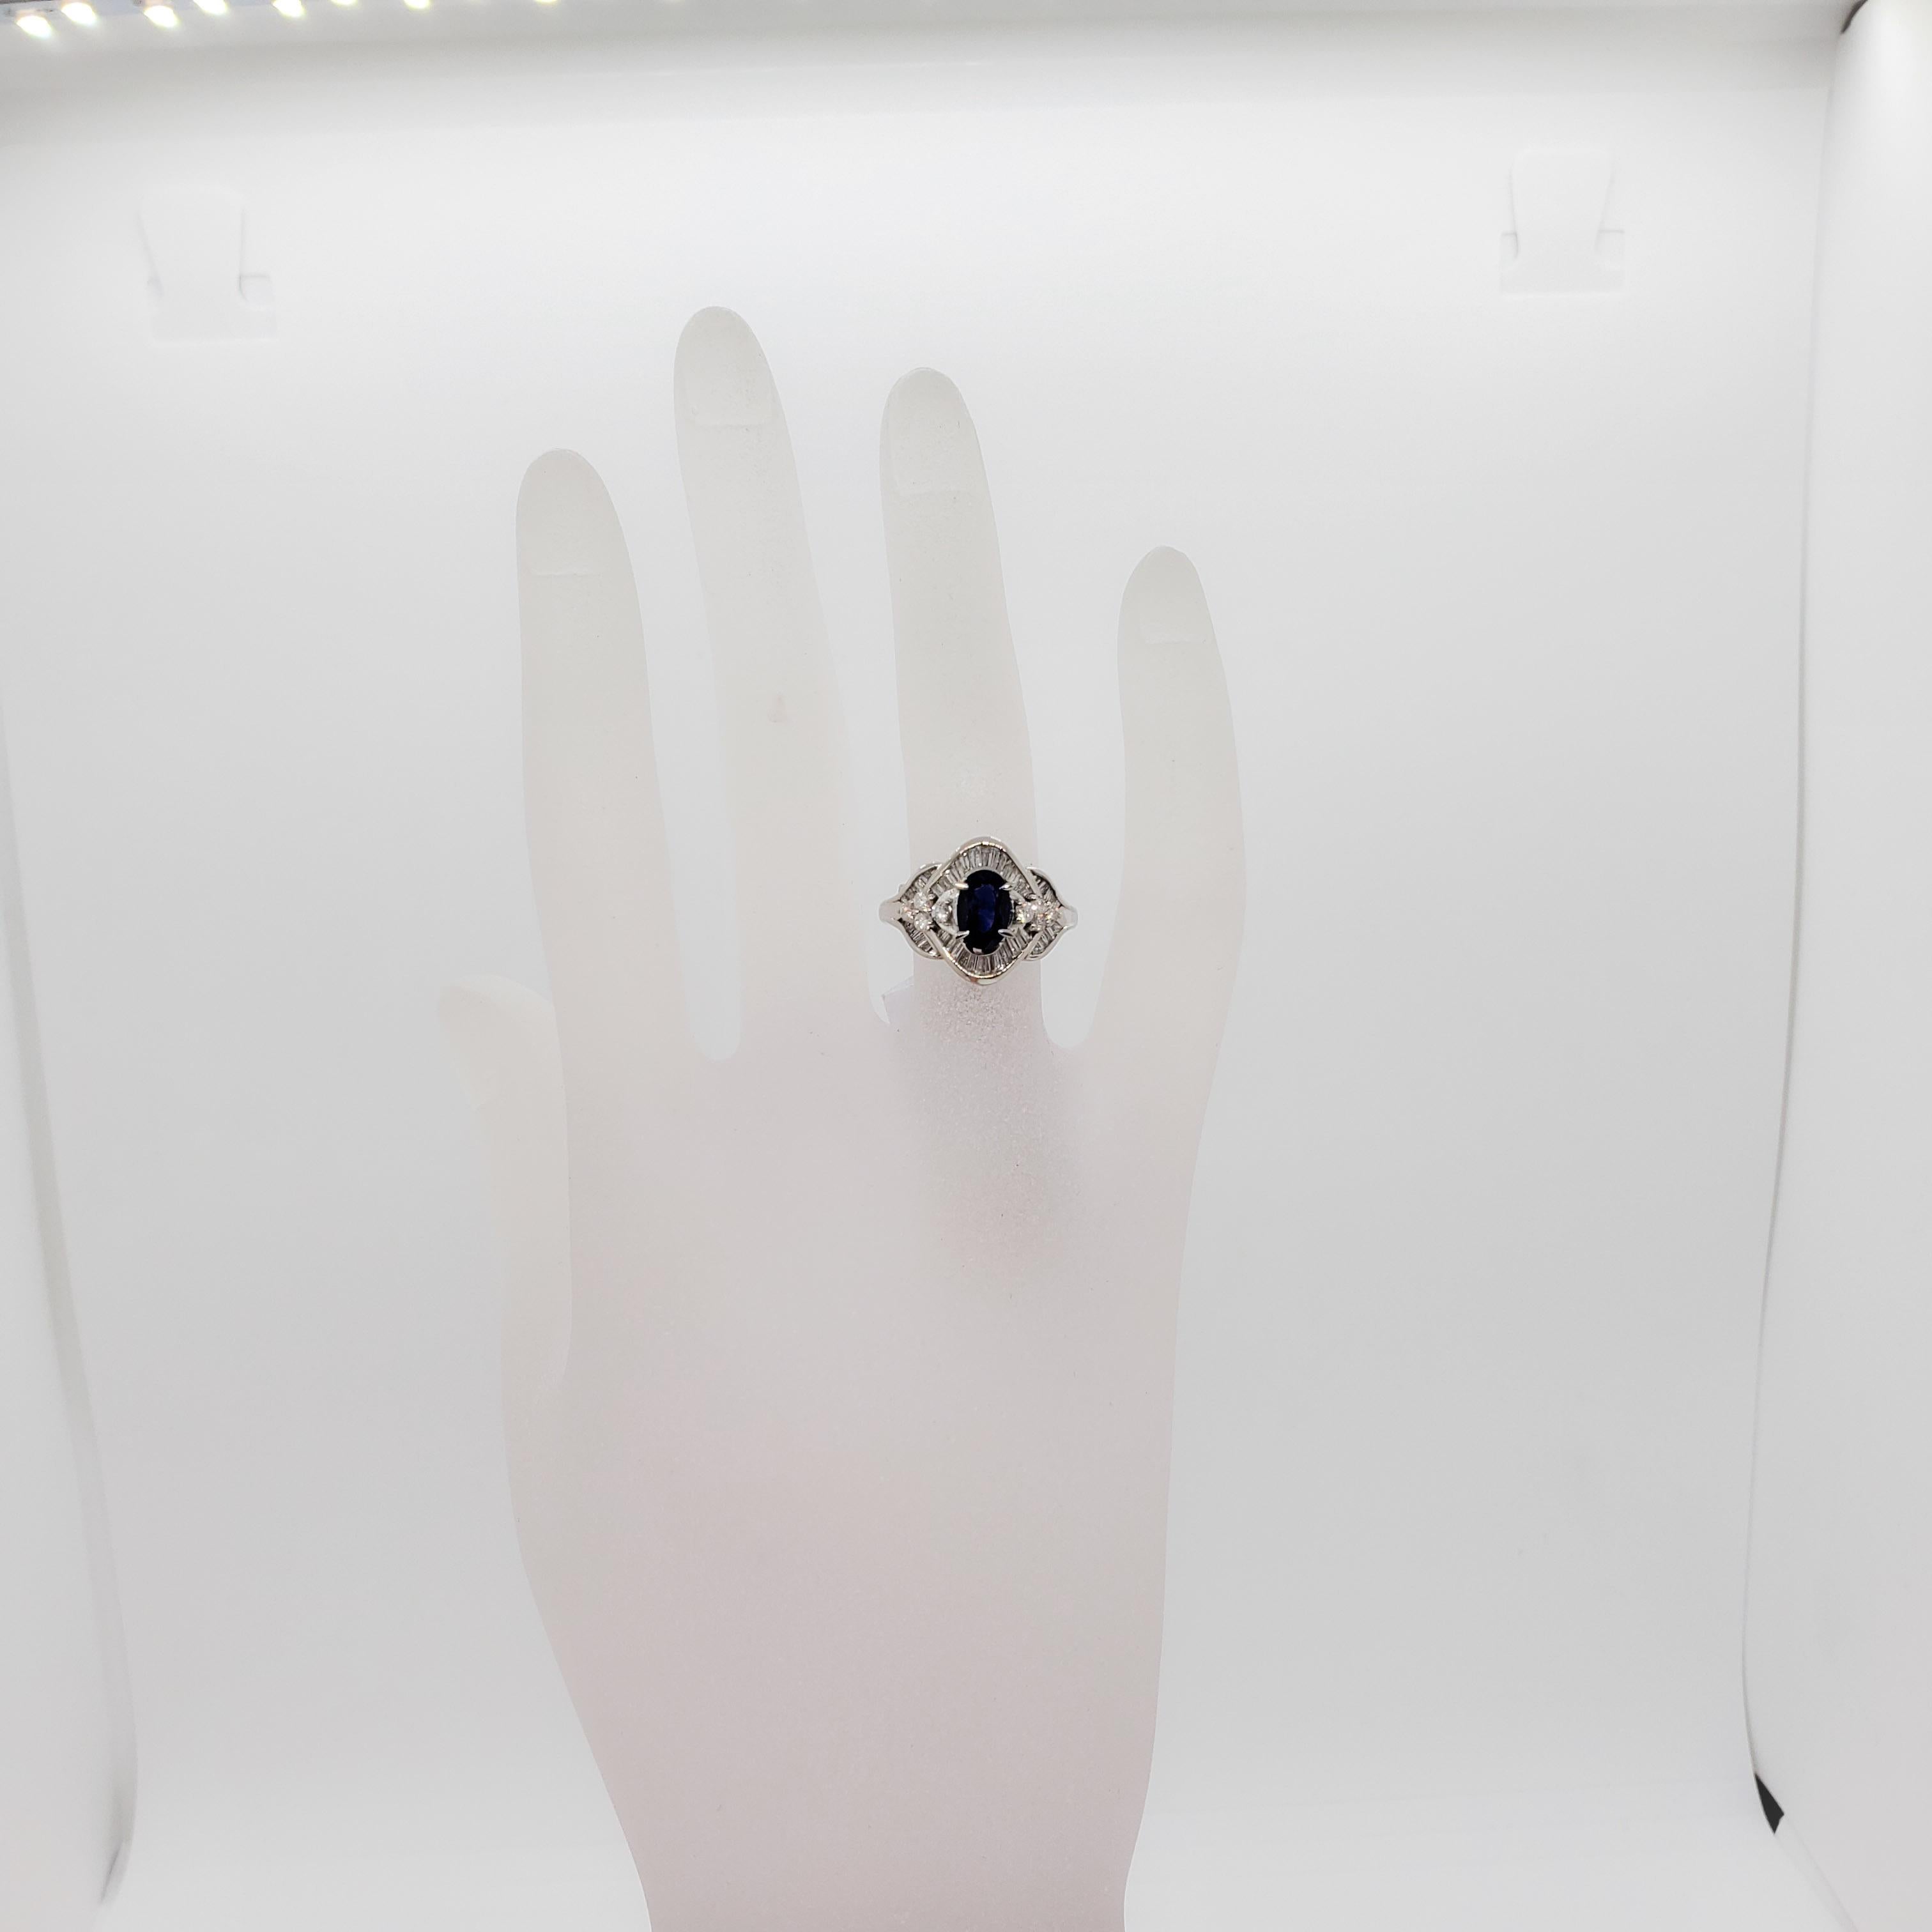 Beautiful deep color blue sapphire oval weighing 1.23 ct. with 0.80 ct. of good quality white diamond rounds and baguettes.  Handmade platinum mounting in size 6.25.  Mint Condition.